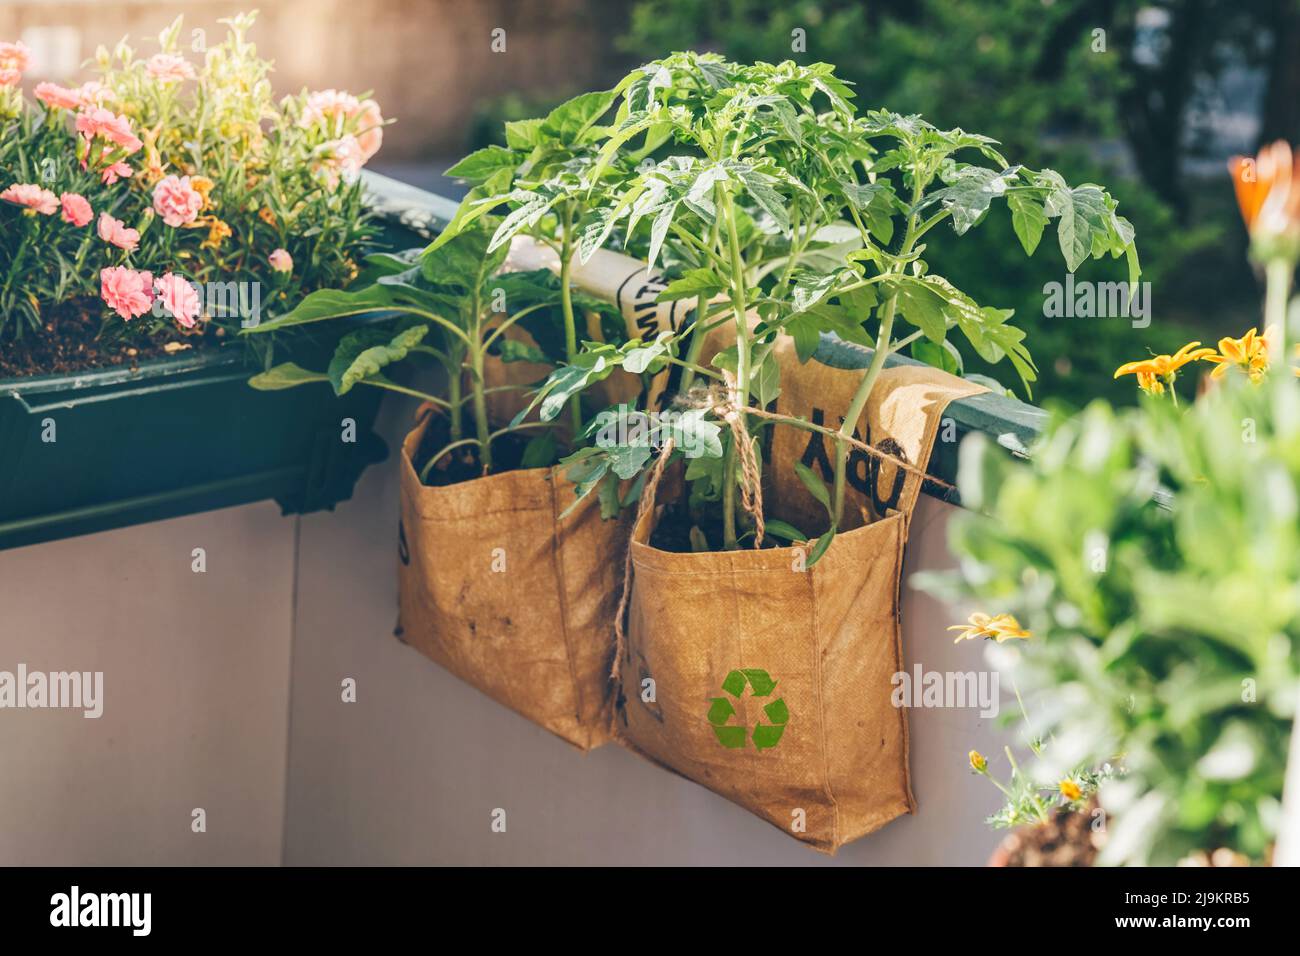 Tomatoes grow in reusable plant grow bags on balcony. Tee-big-bags were recycled manually by indian workers. Upcycling time-limited products. Sustainability macro trend. Stock Photo